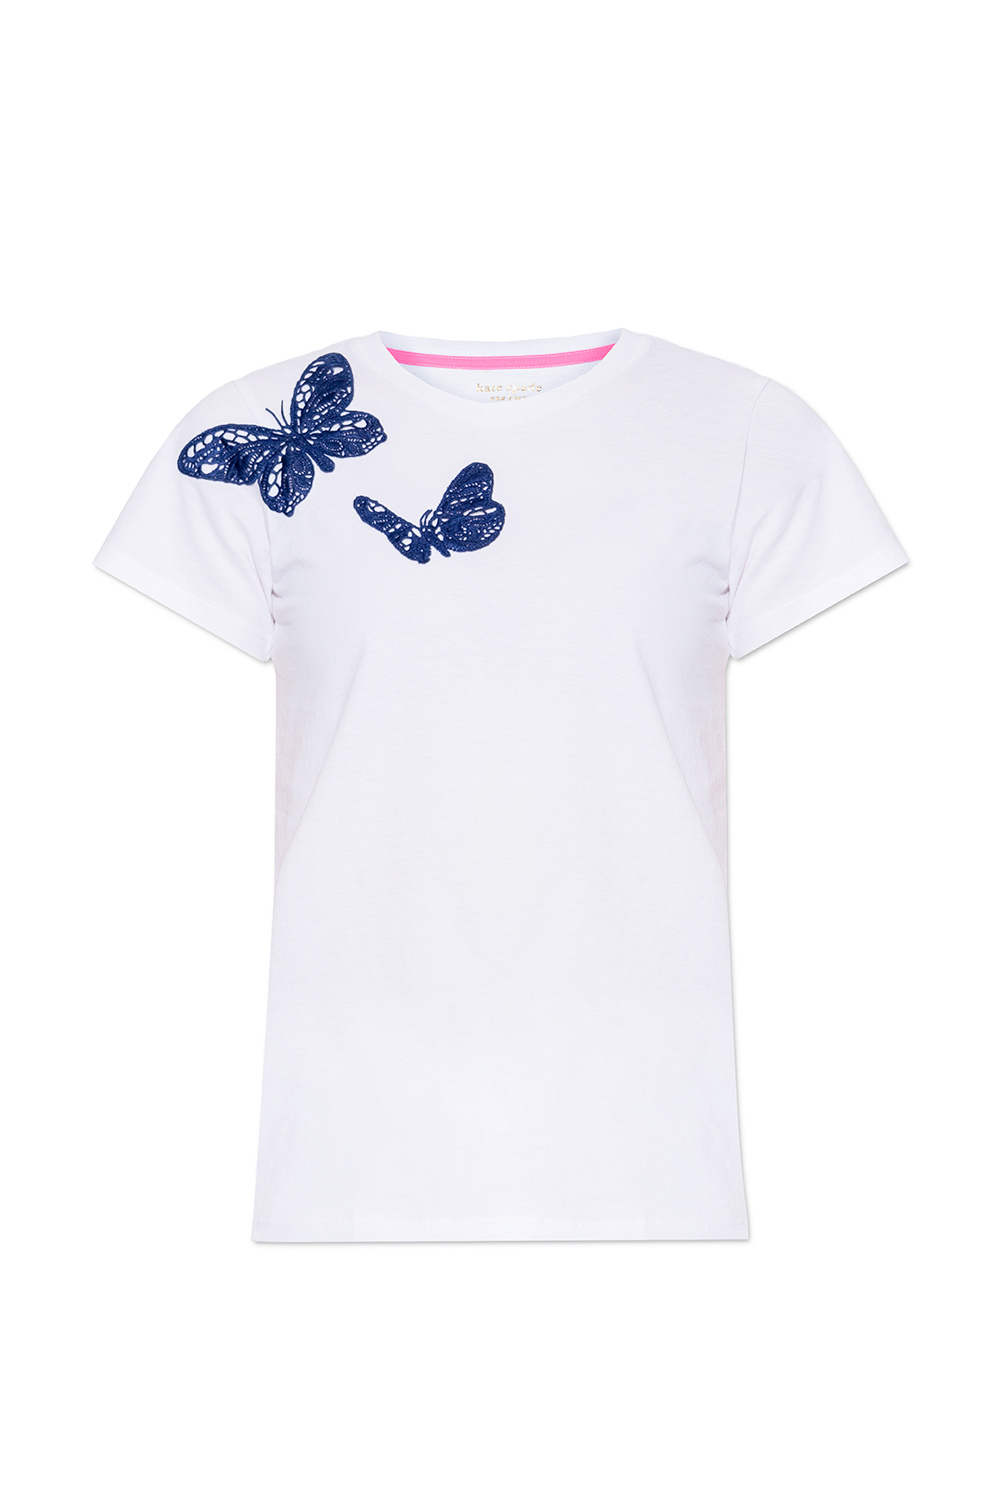 Kate Spade T-shirt with lace patches | Women's Clothing | Vitkac